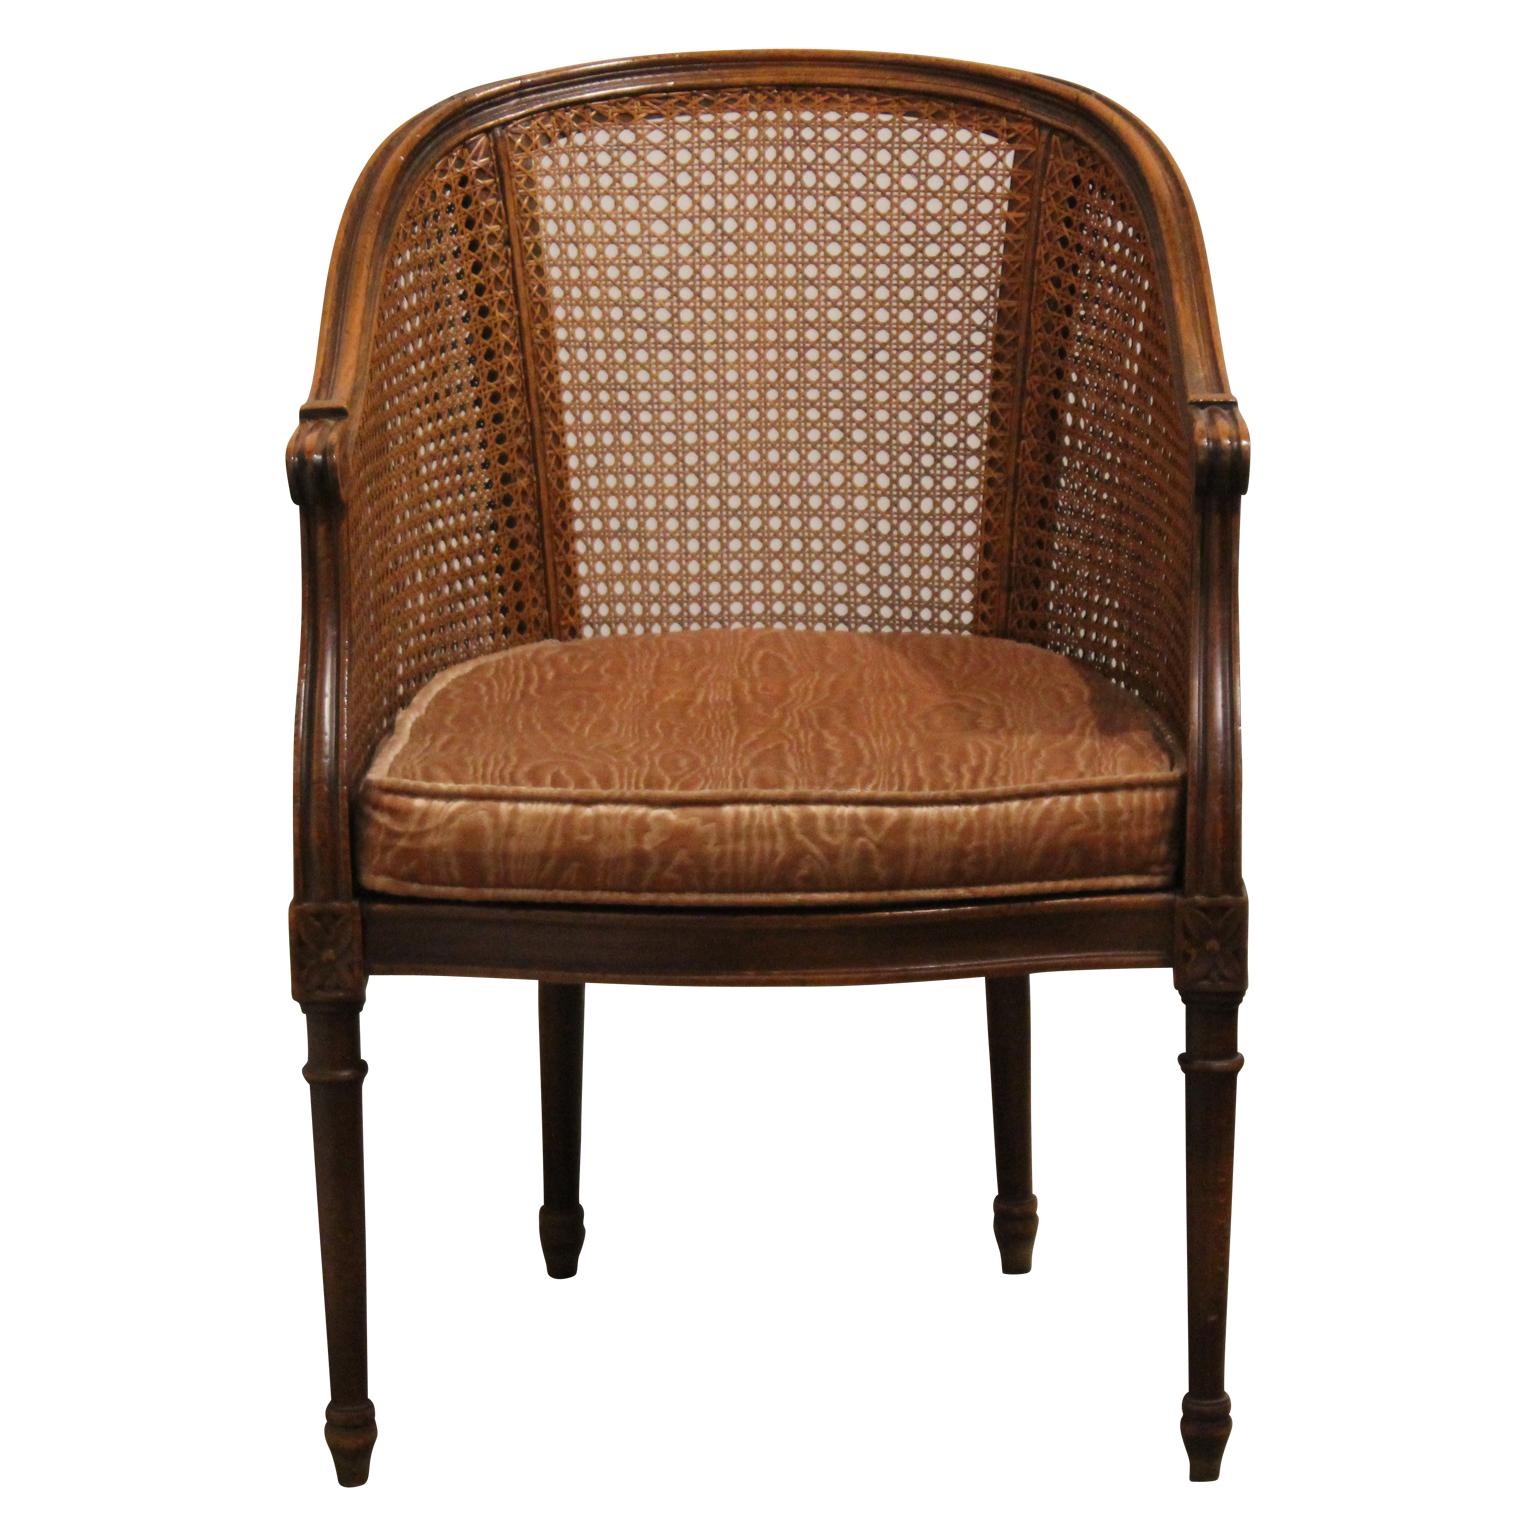 A beautiful set of four French Louis XV cane barrel back chairs. Needs upholstery otherwise in great vintage condition.